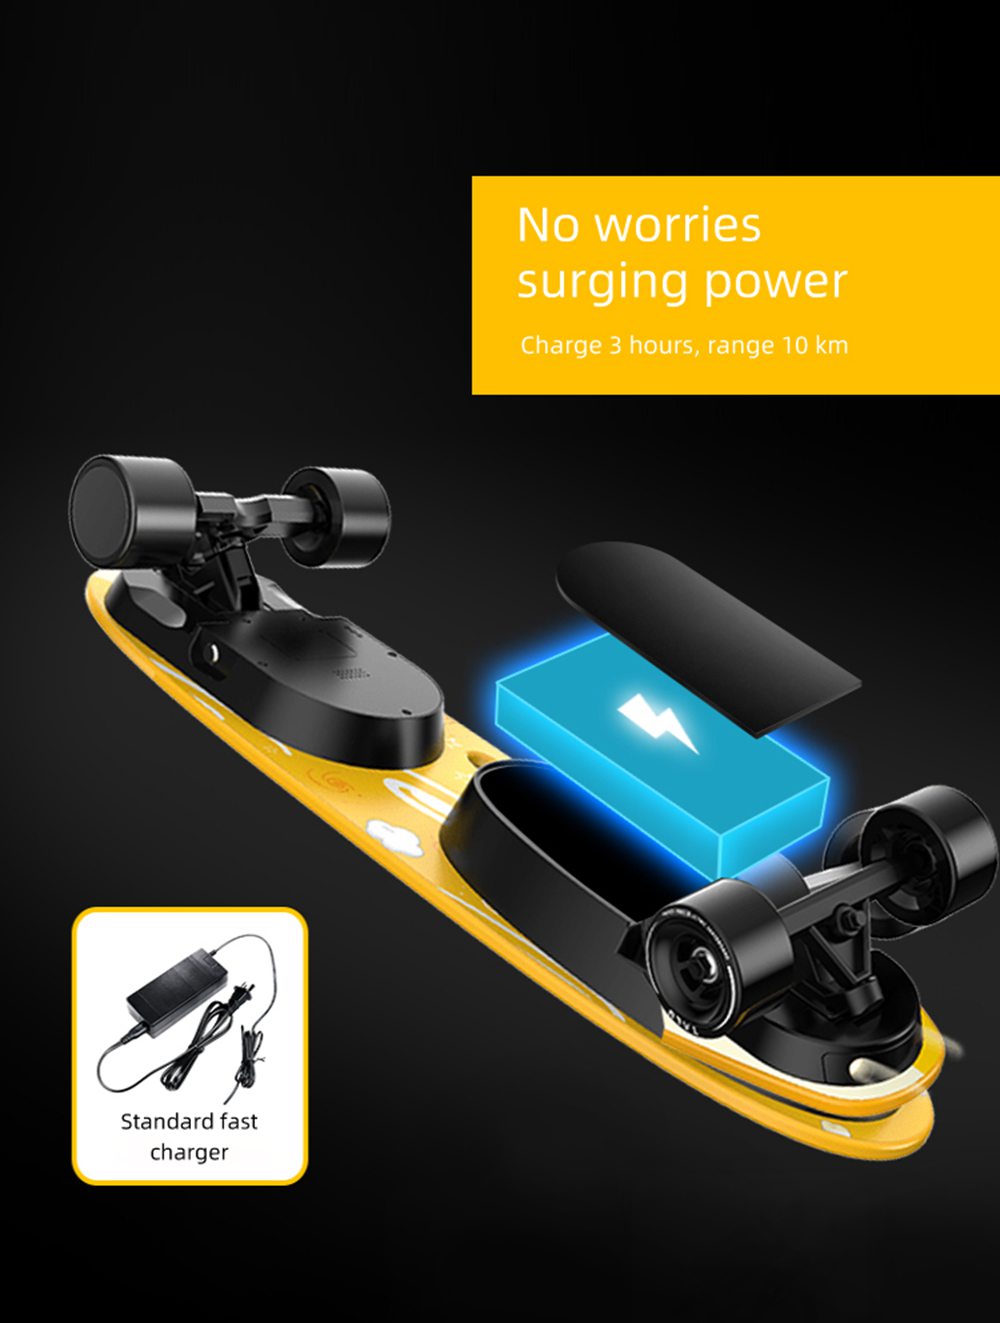 Eswing M15-1 Electric Skateboard Body Control 4 Wheels LG 77.83WH Battery Max Speed 15km/h - Yellow